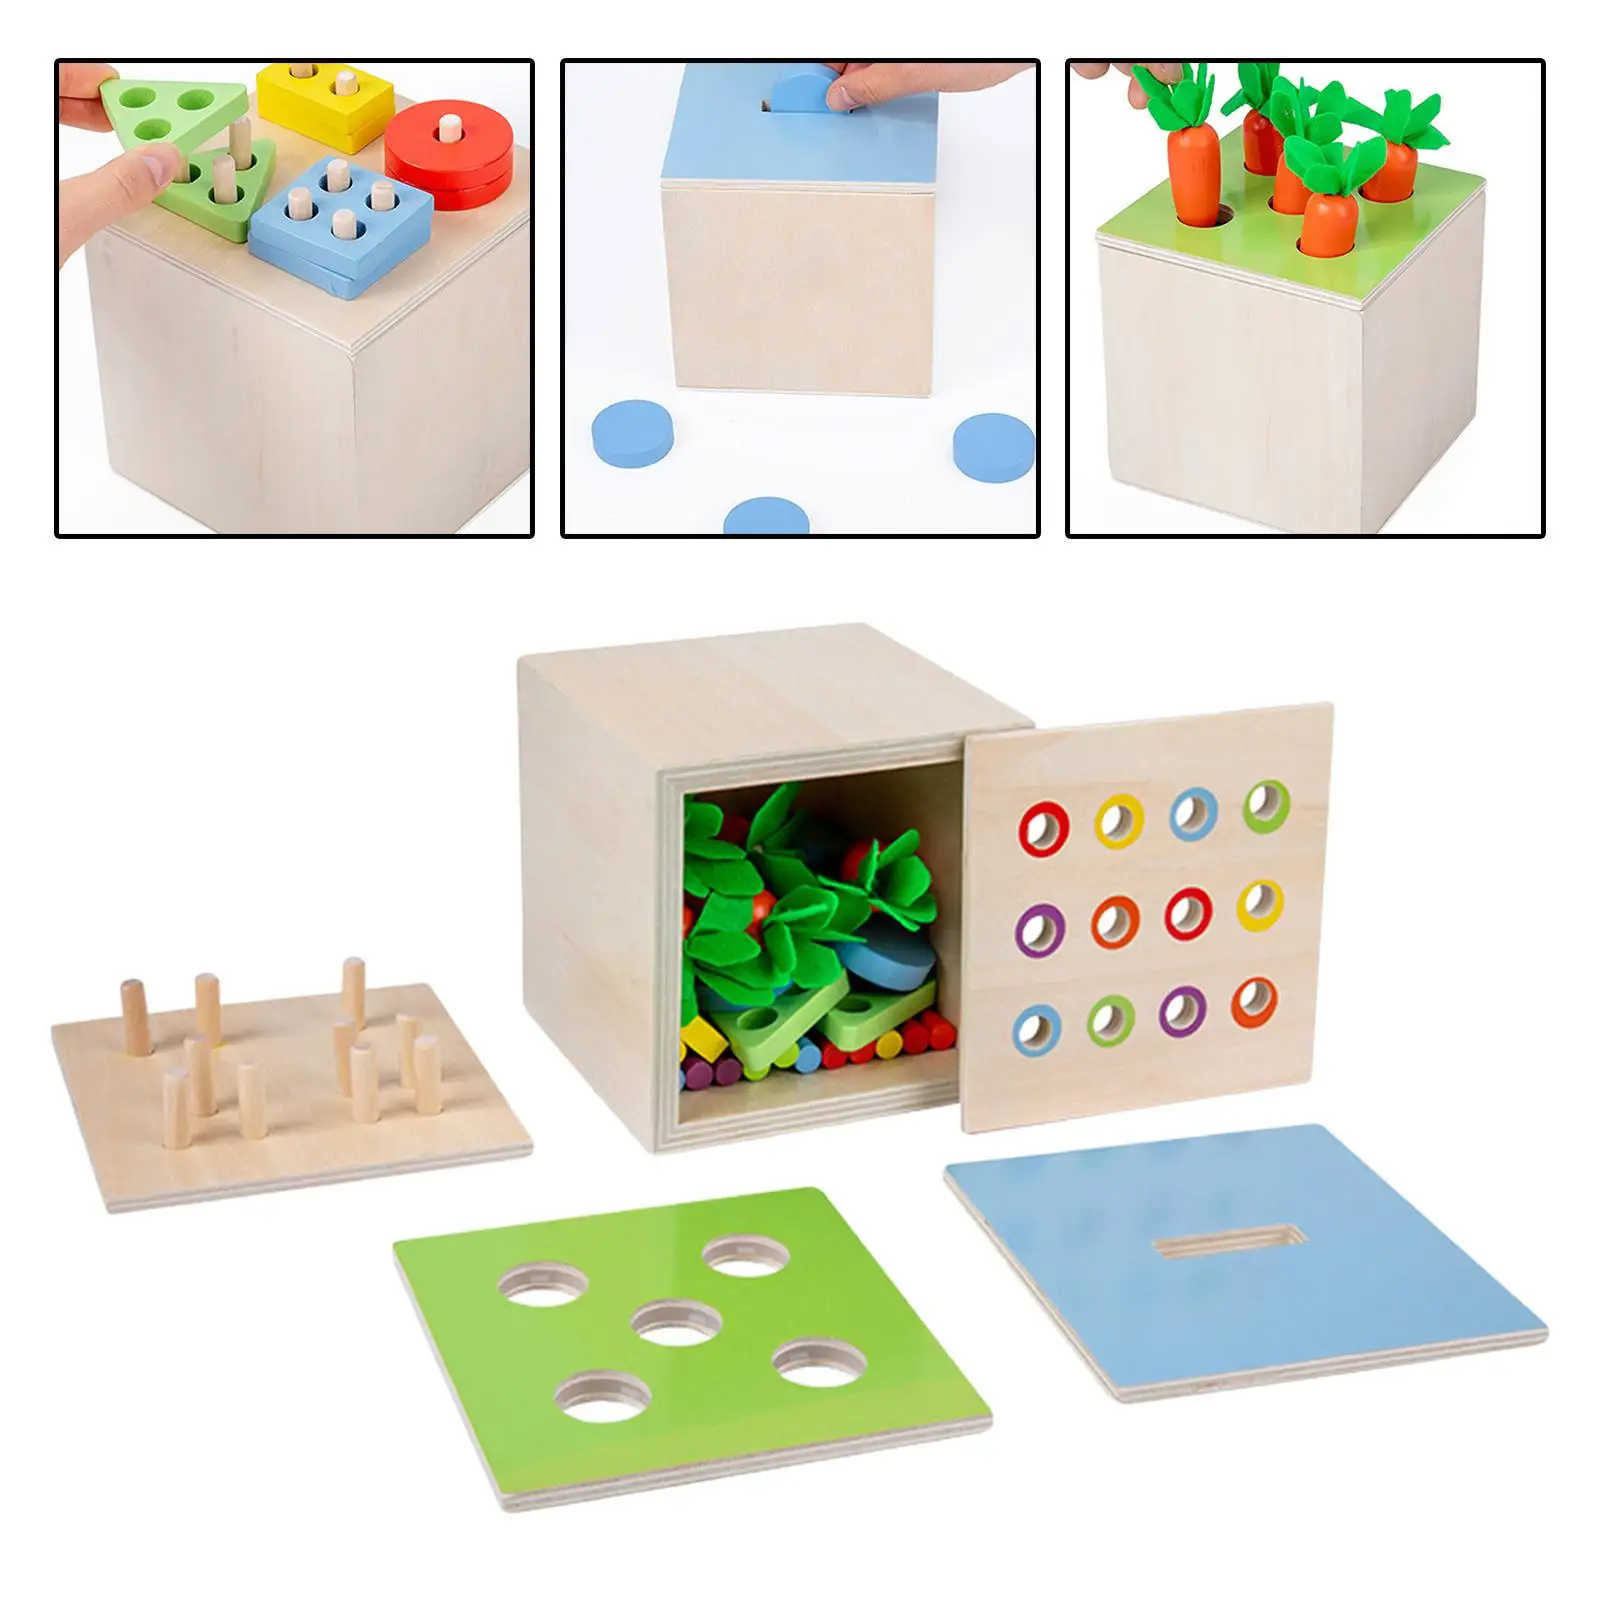 Object Permanence Box Carrot Harvest Toy Matchstick Color Drop Game Color Recognition Coin Drop Game for Preschool Boys Girls